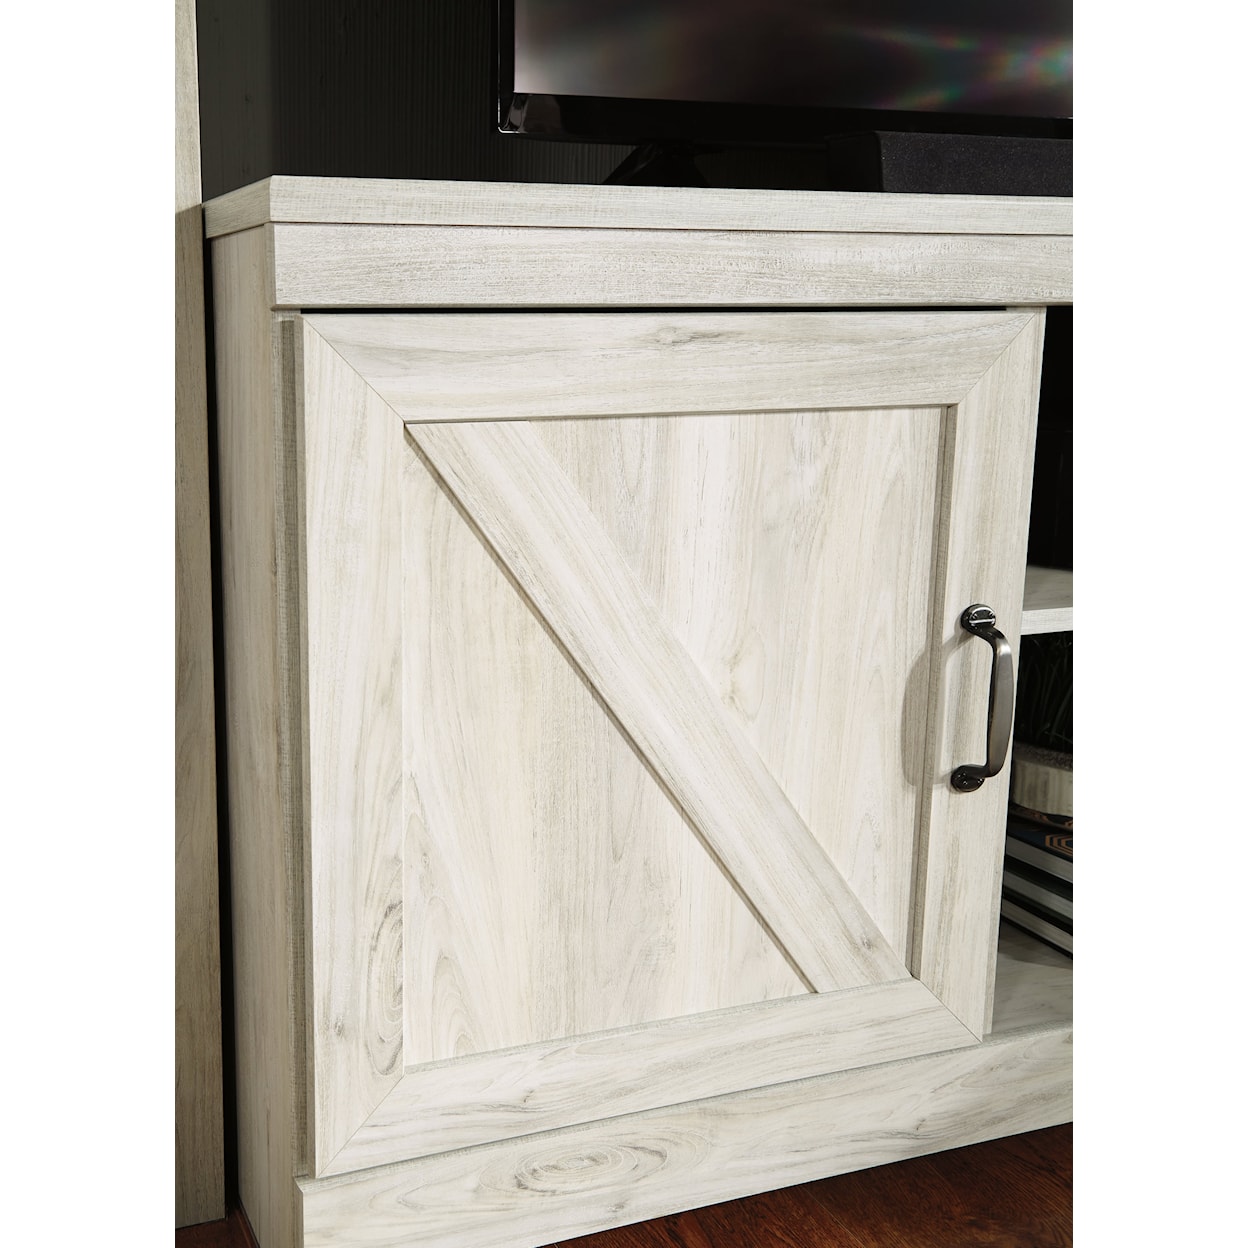 Signature Design by Ashley Furniture Bellaby Entertainment Center